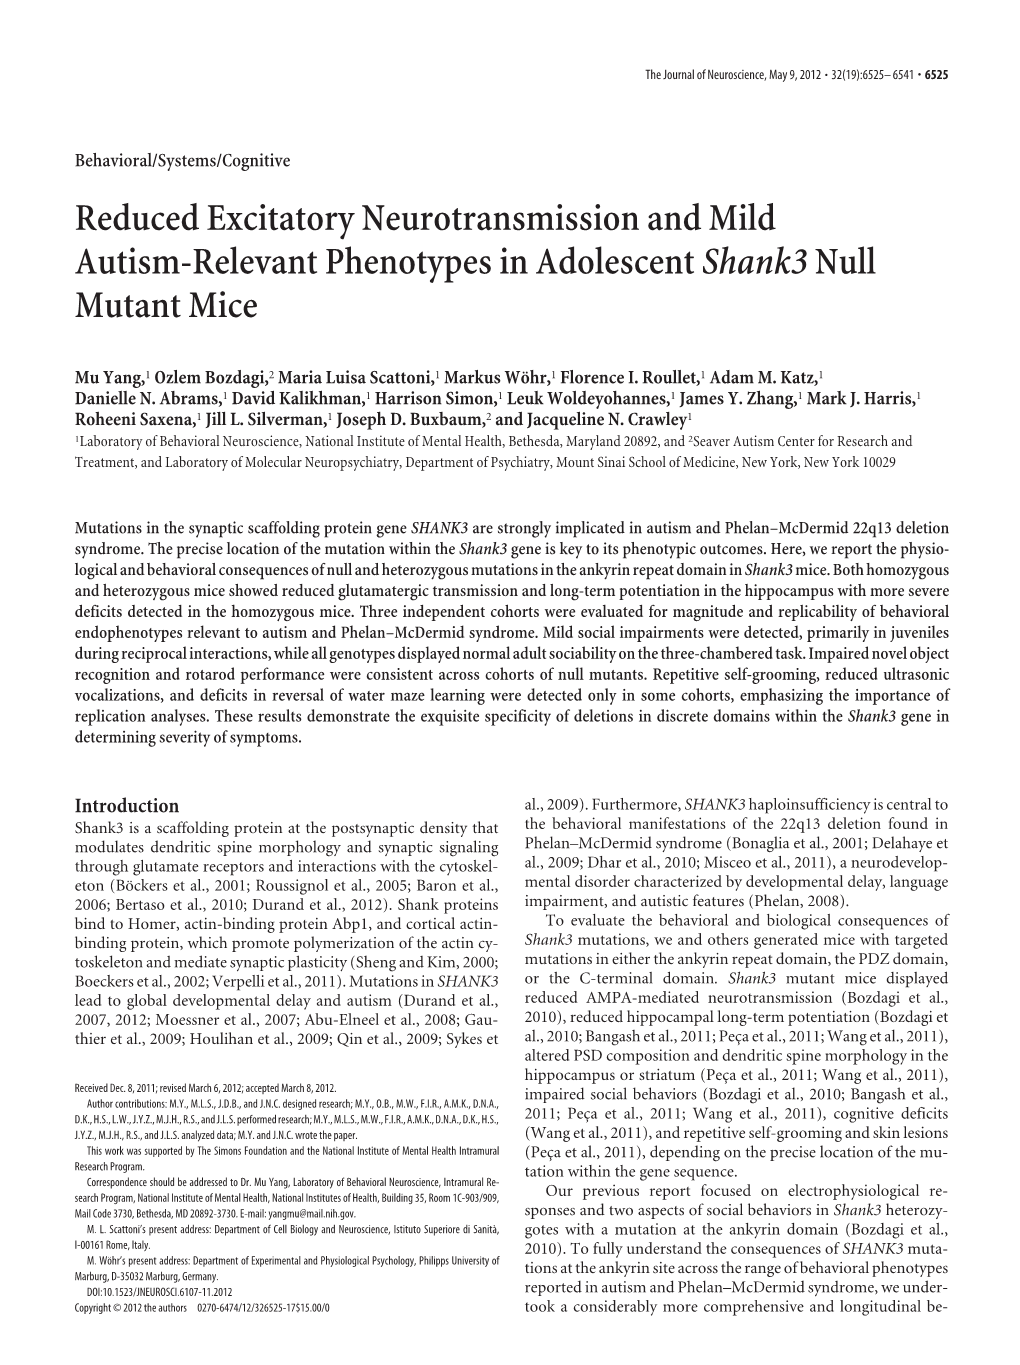 Reduced Excitatory Neurotransmission and Mild Autism-Relevant Phenotypes in Adolescent Shank3 Null Mutant Mice